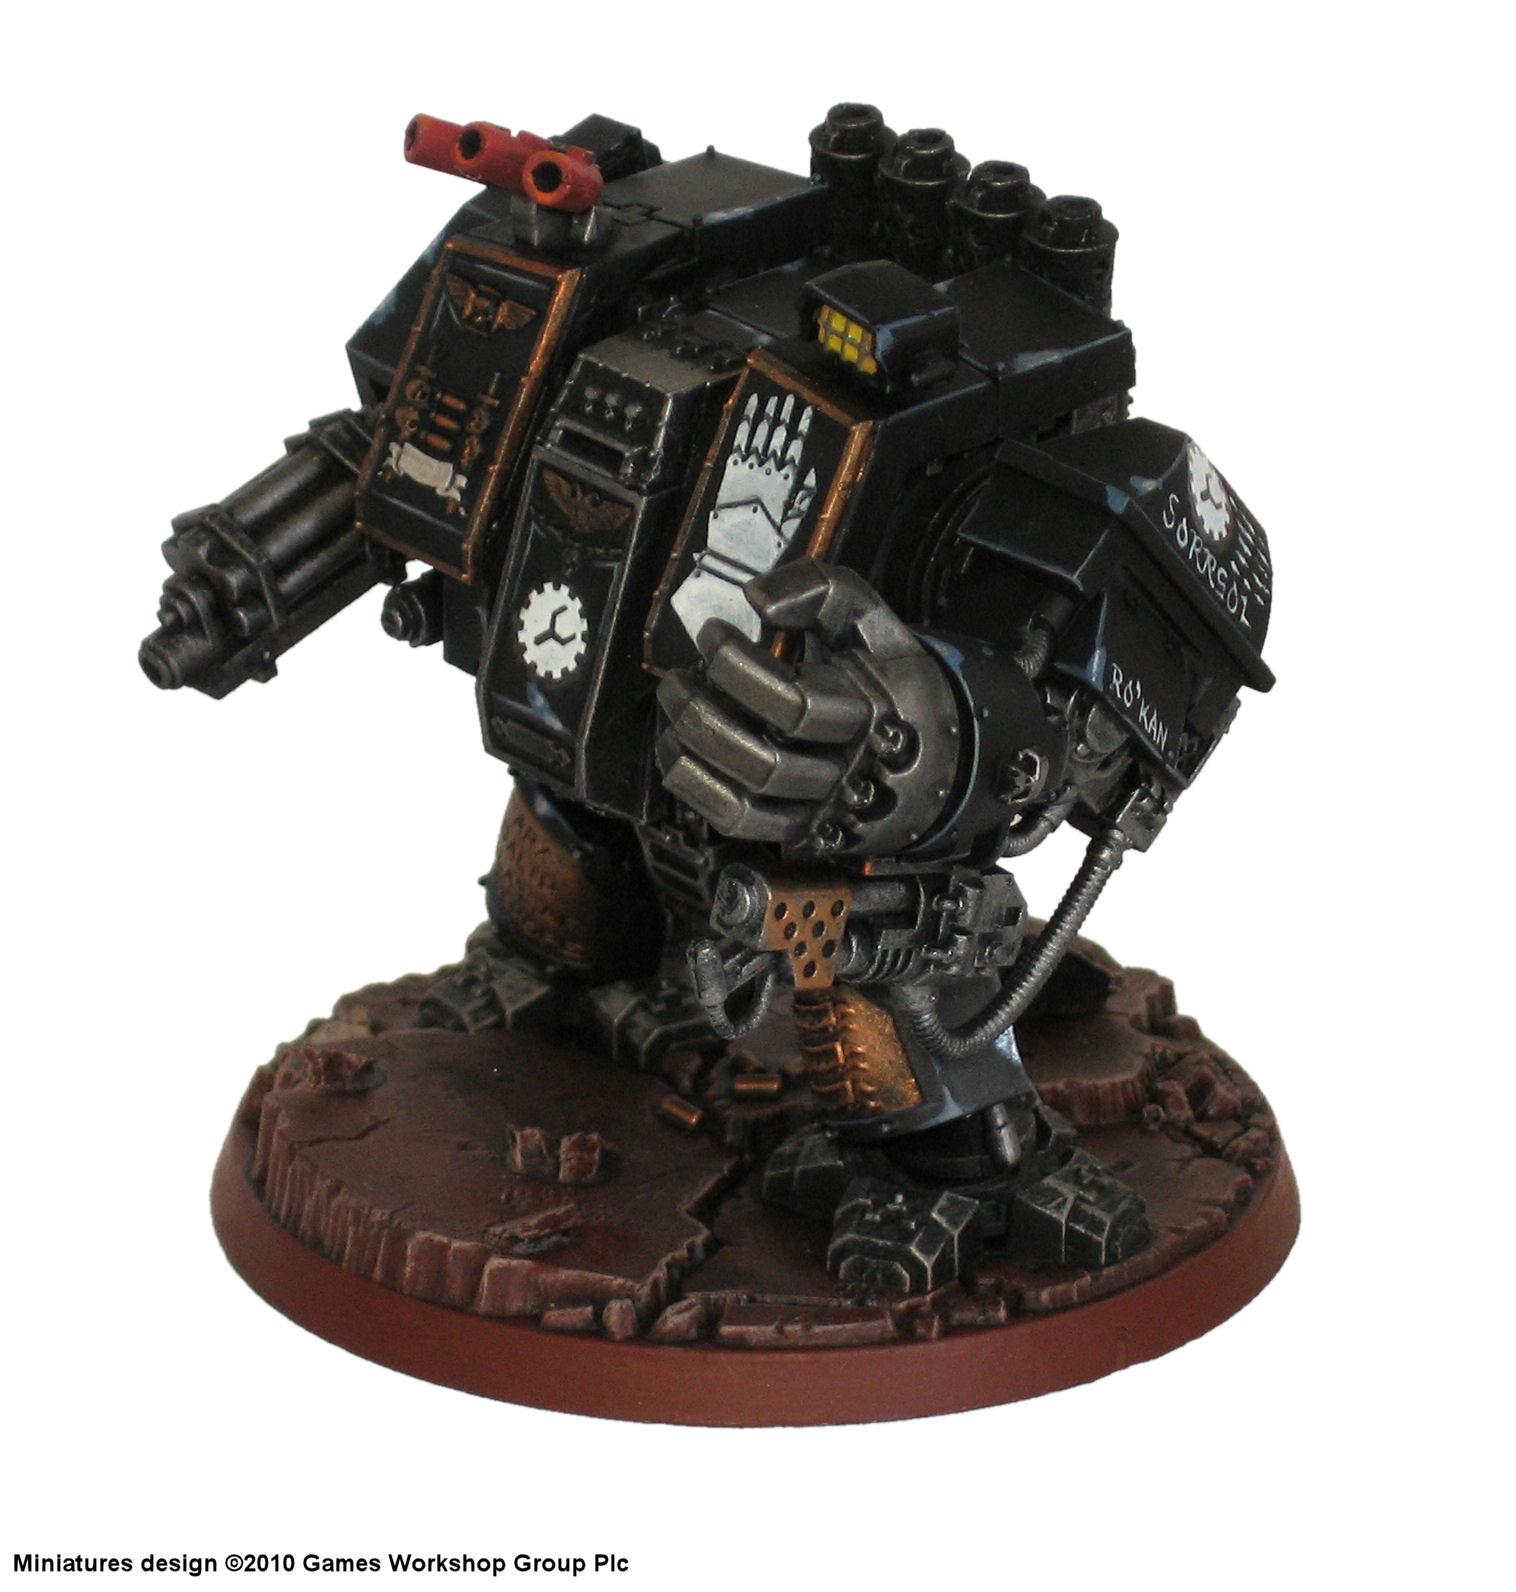 Dreadnought, Hands, Iron, Ro'kan, Science-fiction, Space, Space Marines, Venerable, Warhammer 40,000, Warhammer Fantasy